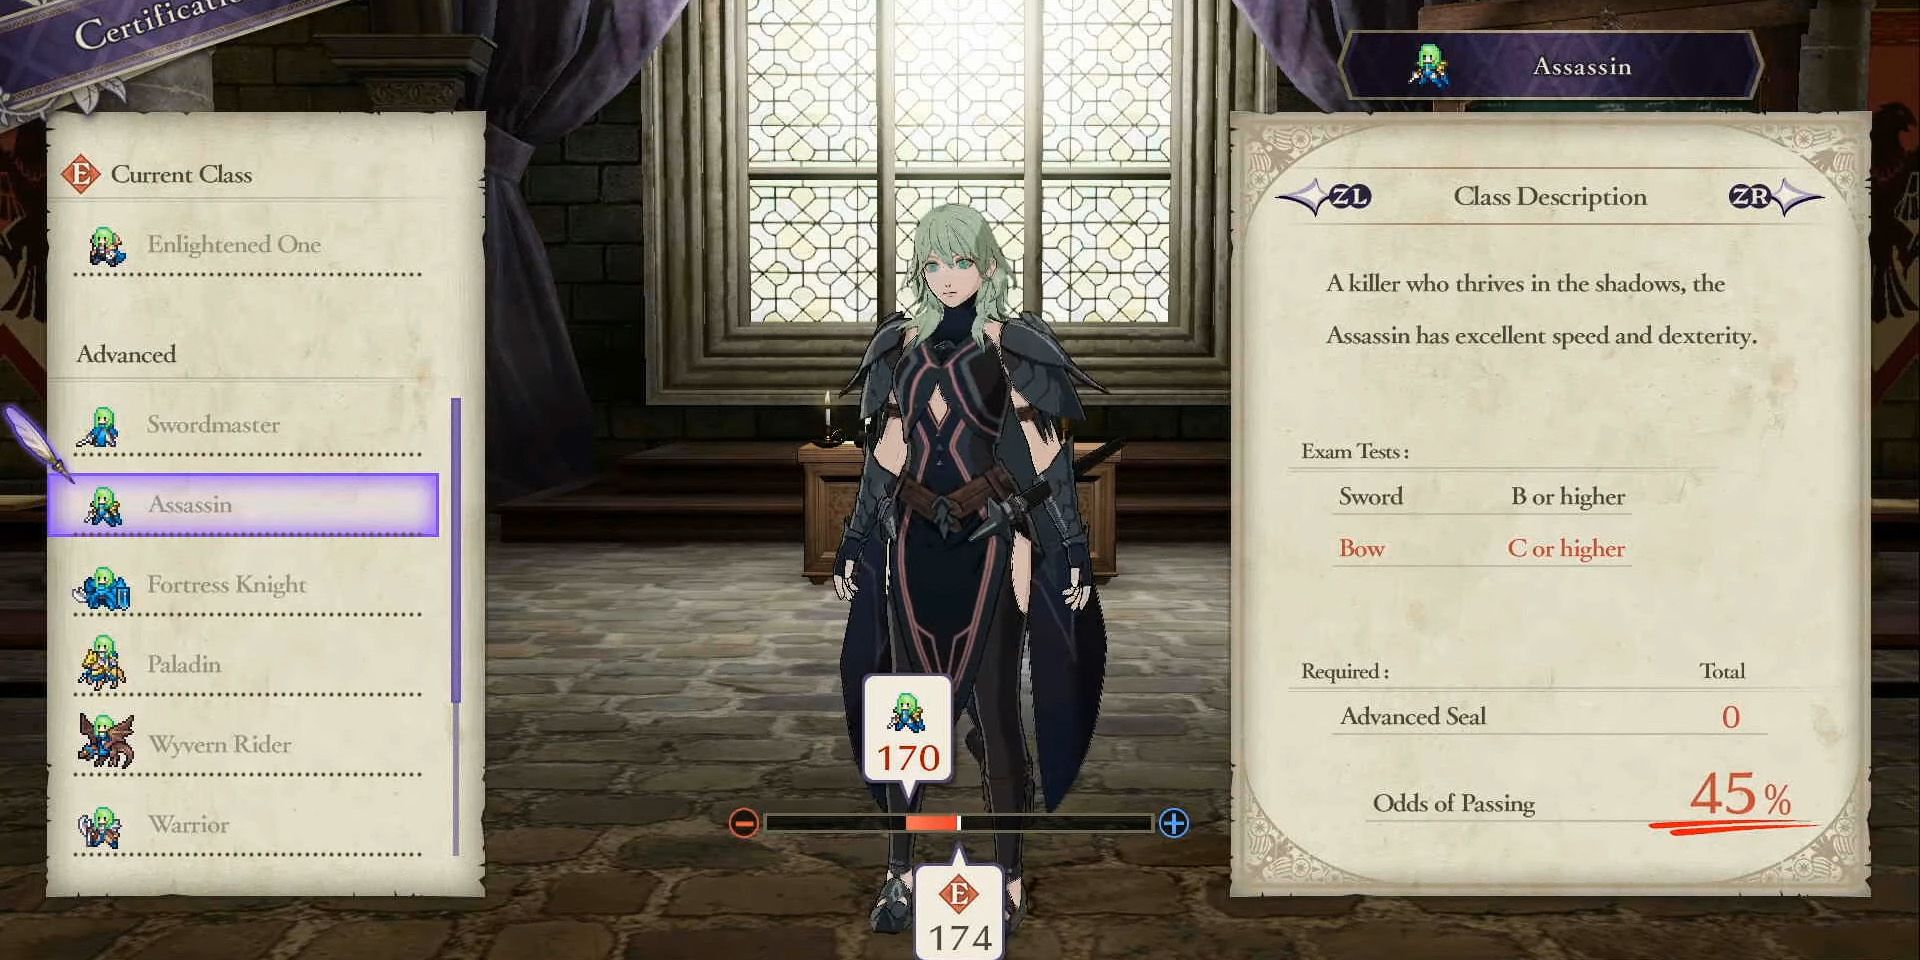 Female Byleth using the Assassin class in Fire Emblem: Three Houses